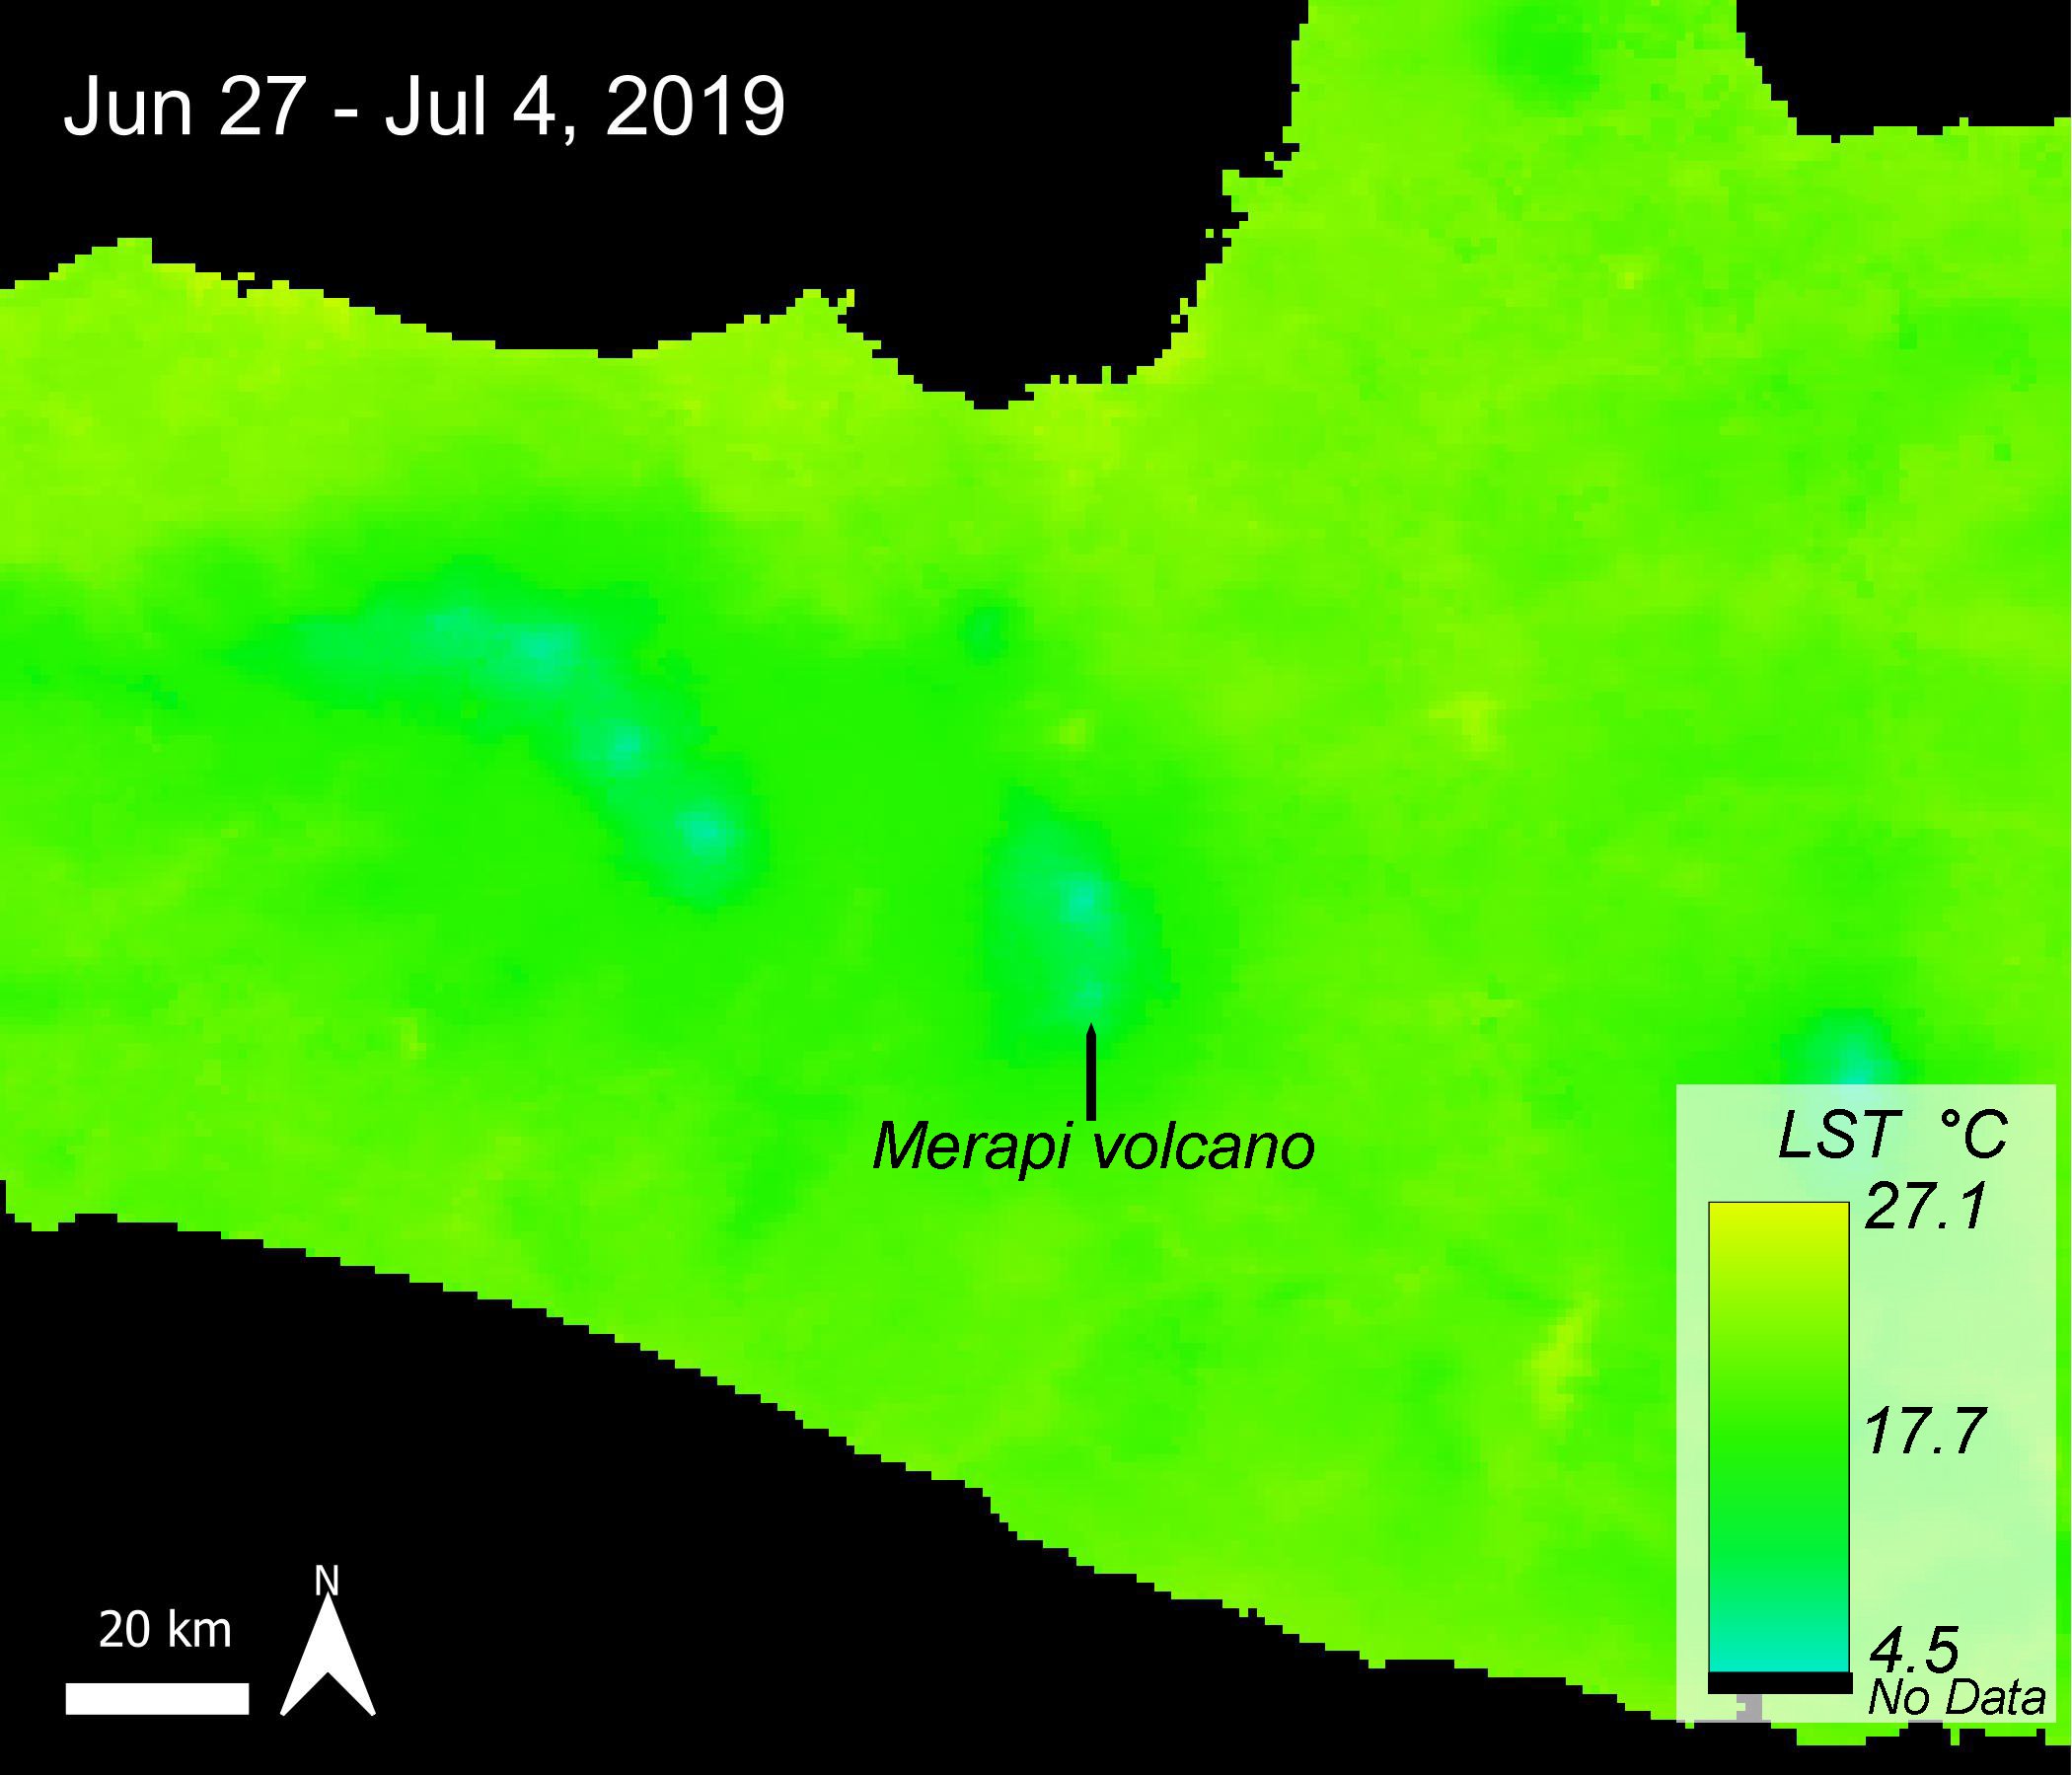 An LST map over the Merapi volcano form Jun 27 - July 4, 2019. The map shows temperatures from 4.5 degrees Celsius to 27.1 degrees Celsius ranging from blue (low) to green to yellow (high). The peak of the Merapi volcano is shown as blue.